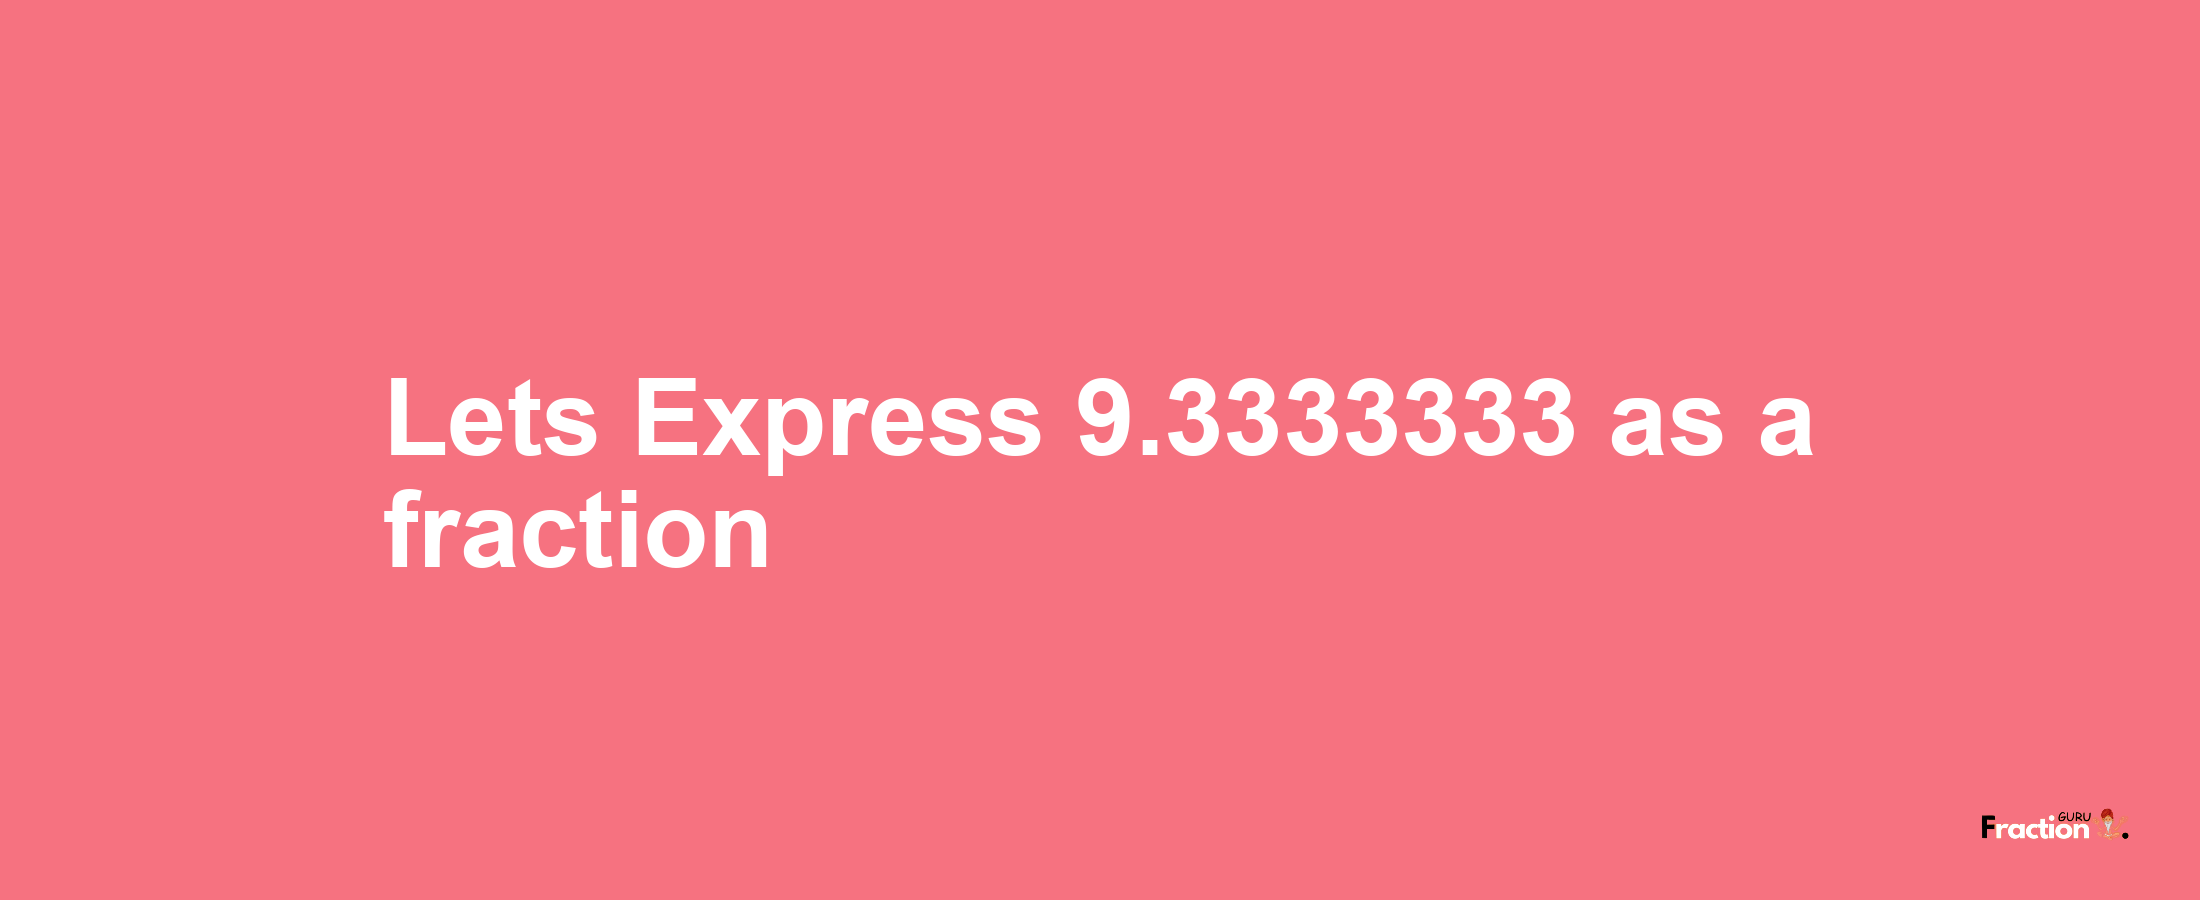 Lets Express 9.3333333 as afraction